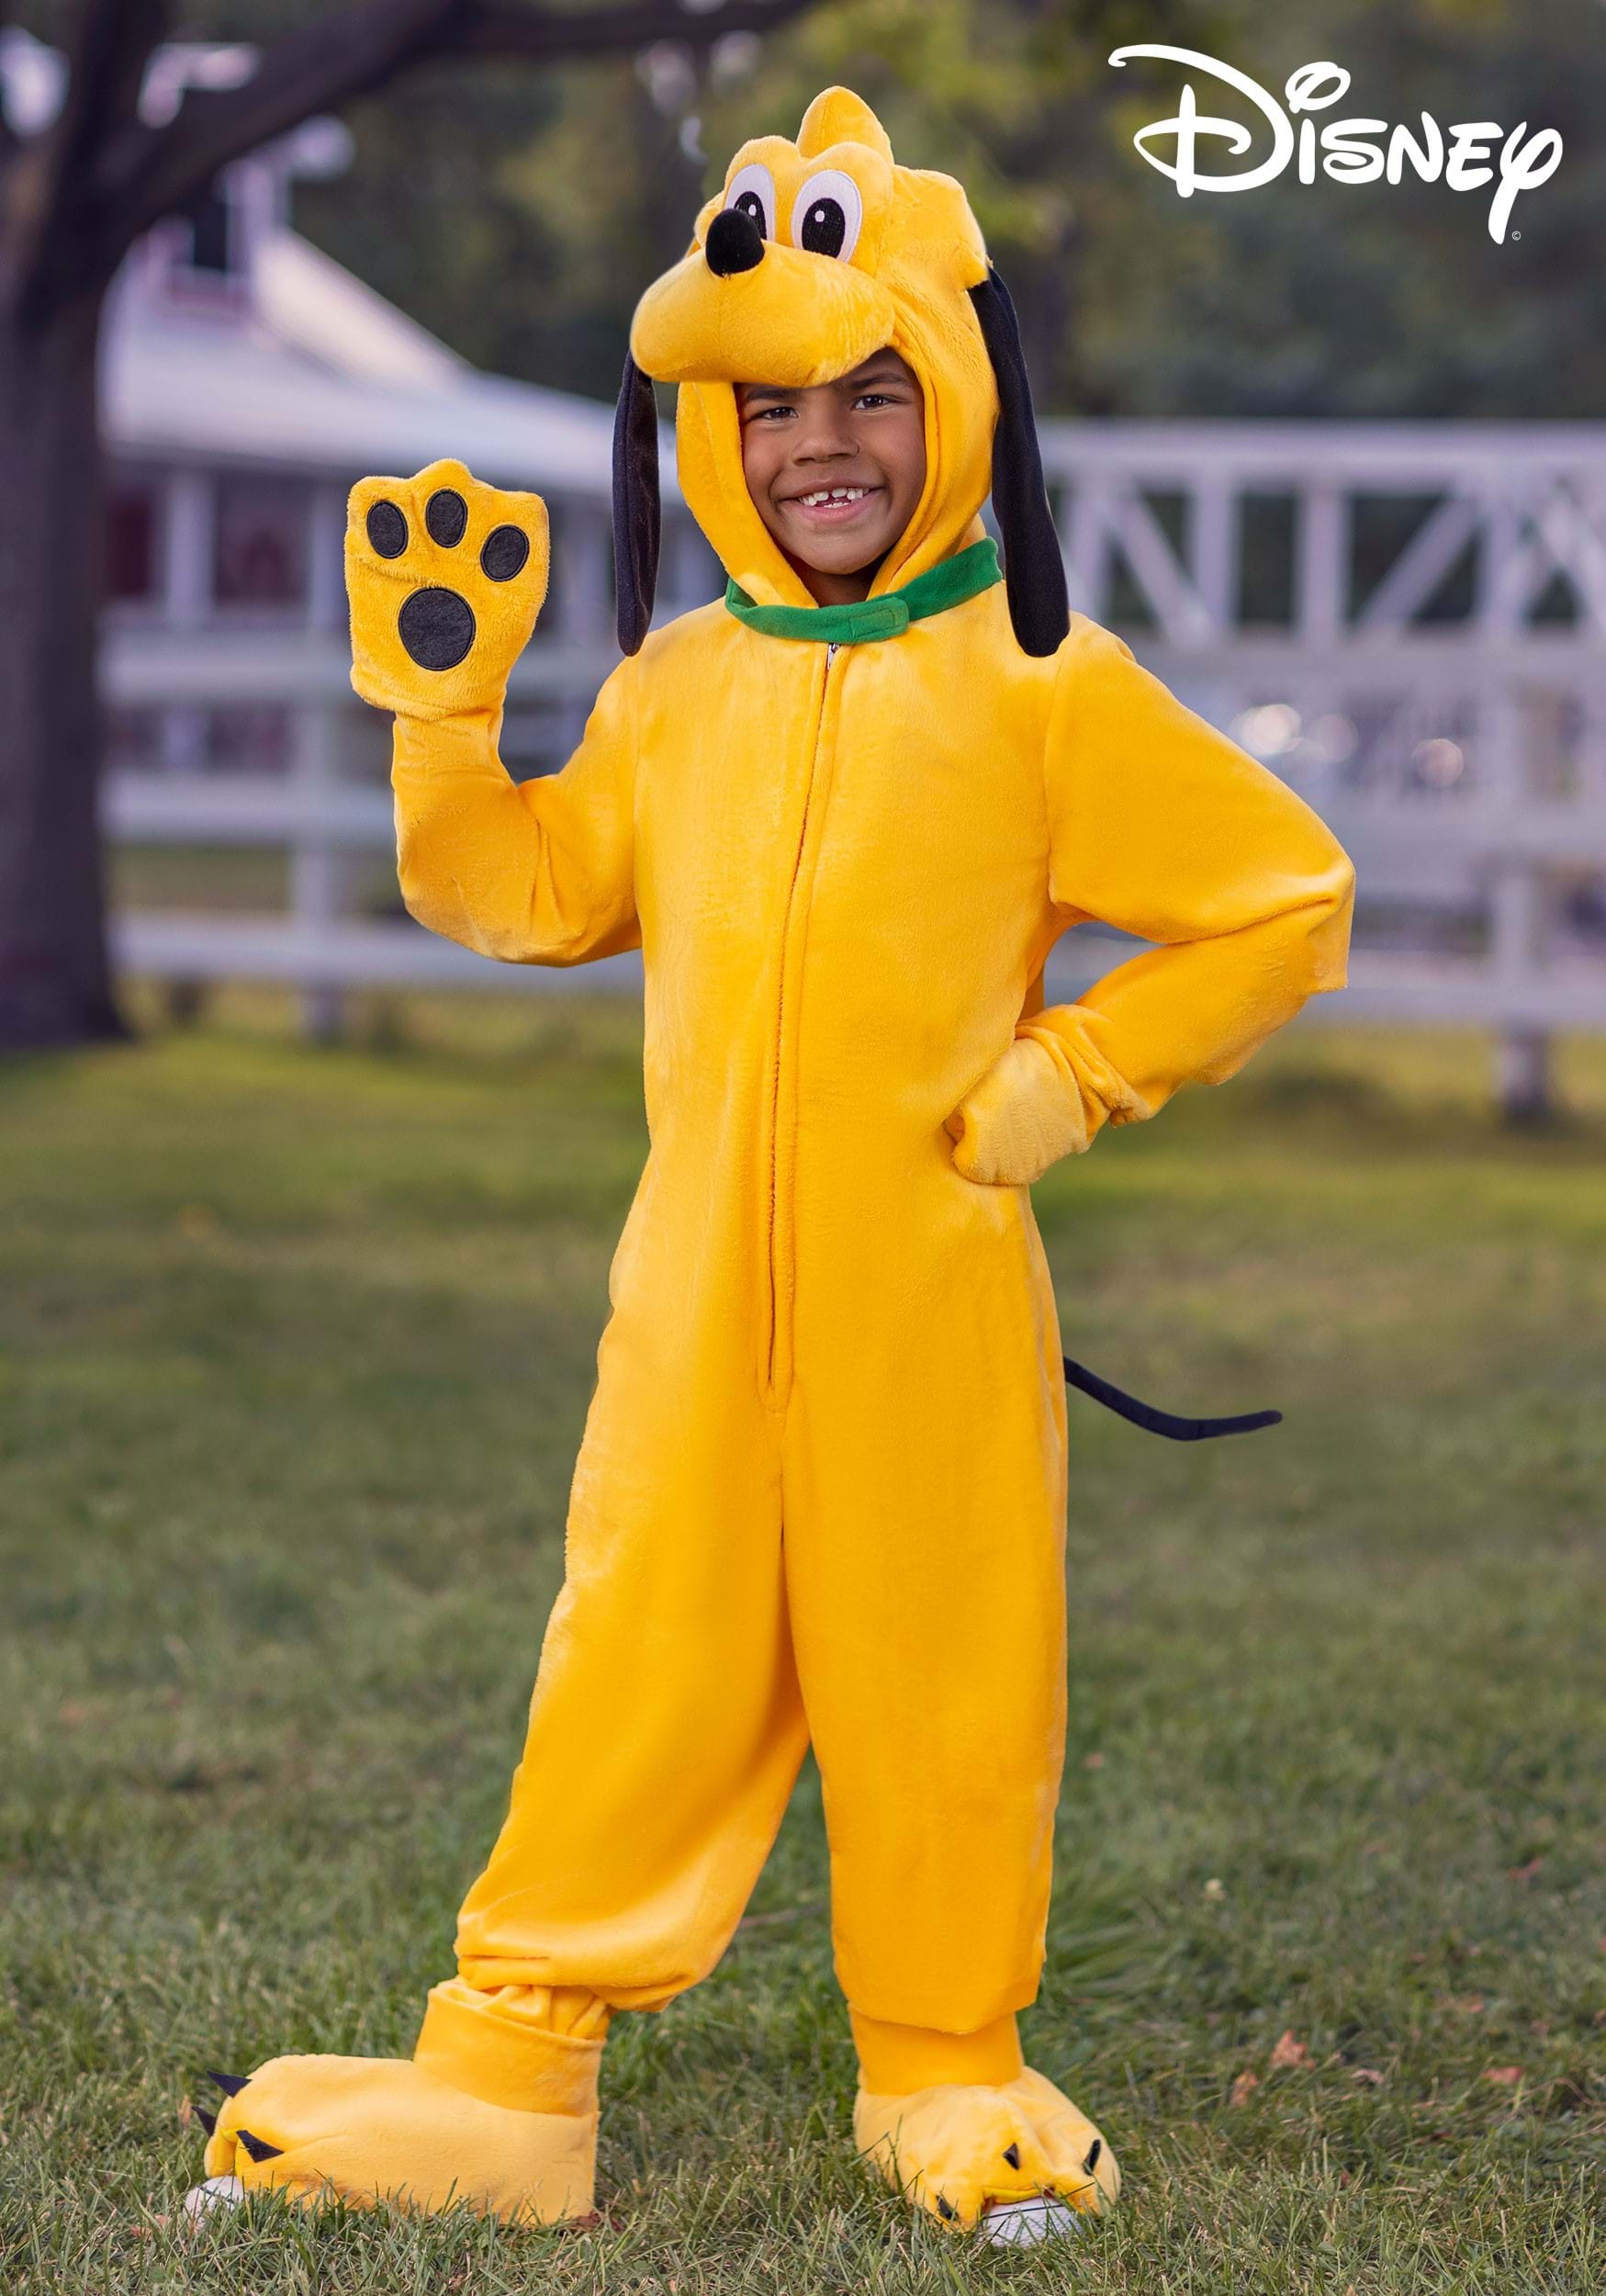 https://images.fun.com/products/75385/1-1/disney-pluto-costume-for-kids.jpg